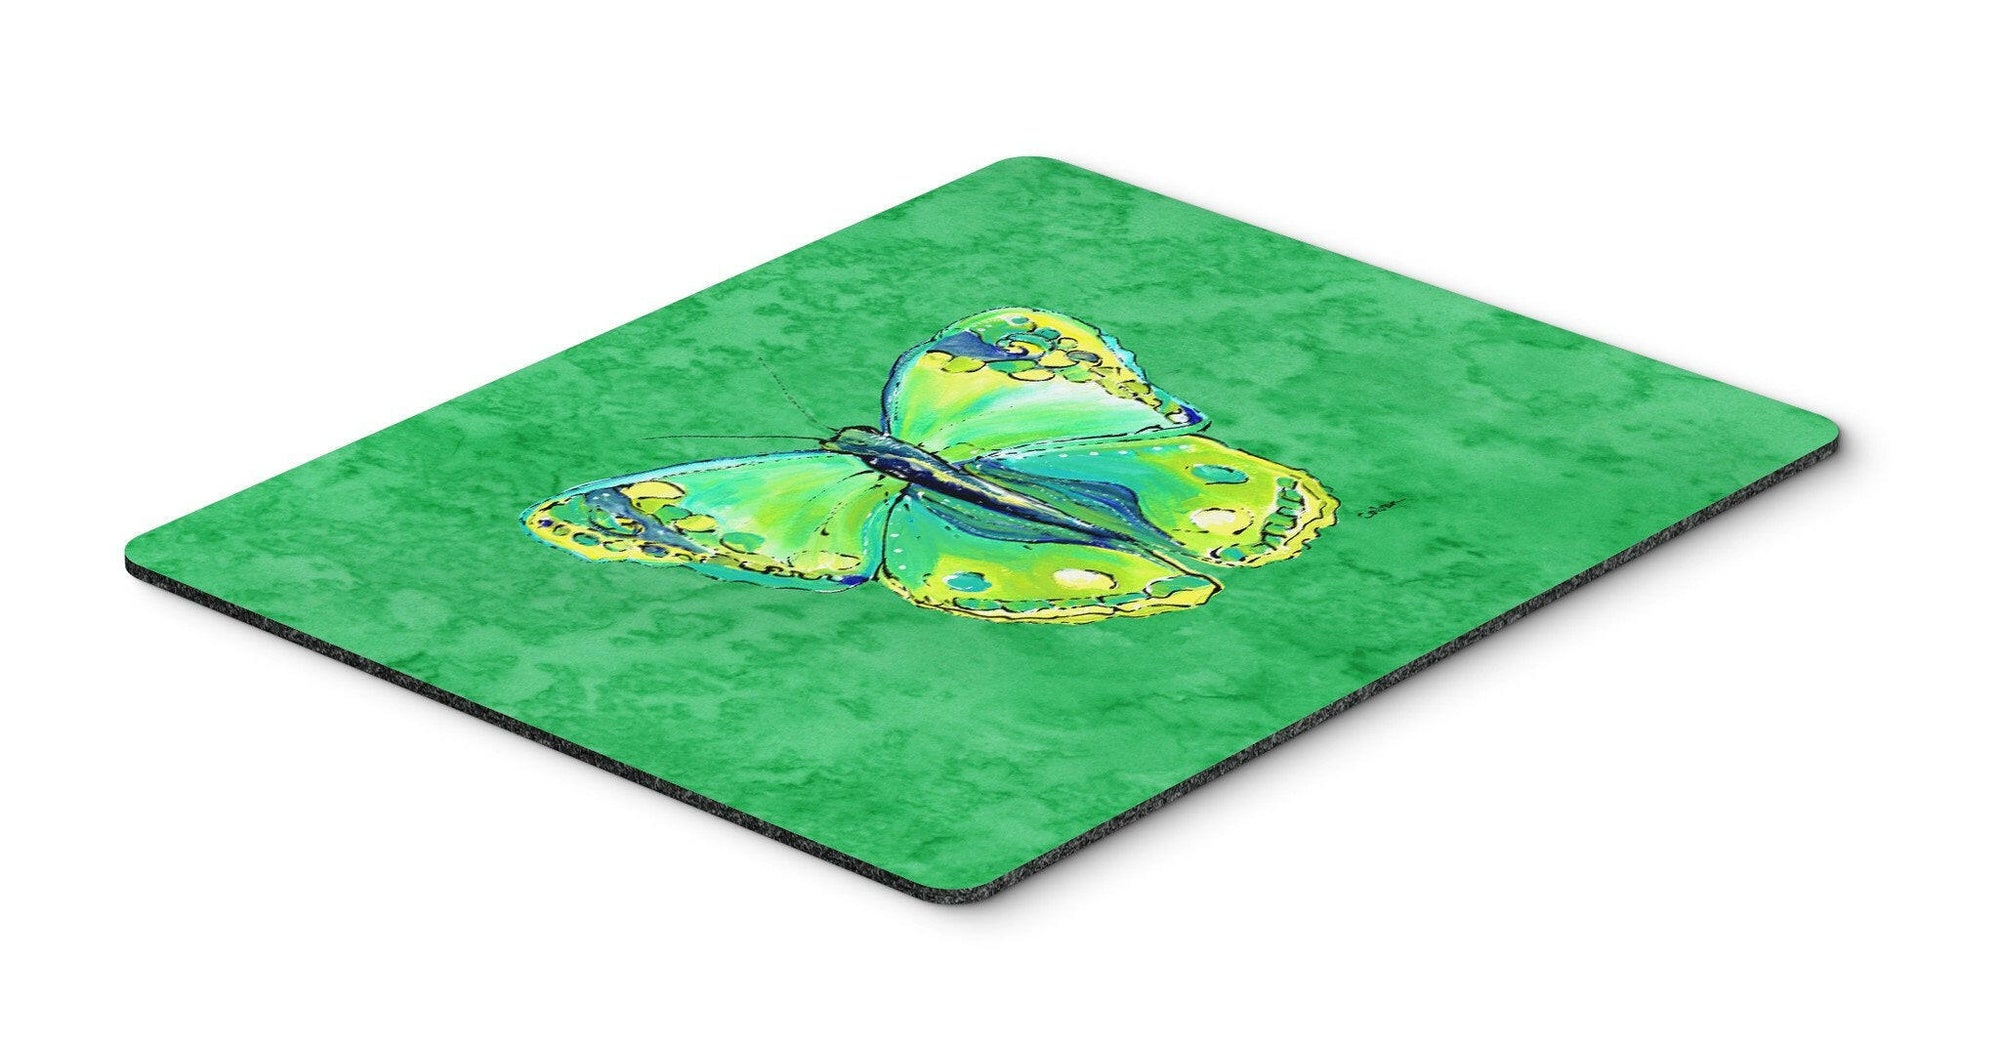 Butterfly Green on Green Mouse Pad, Hot Pad or Trivet by Caroline's Treasures